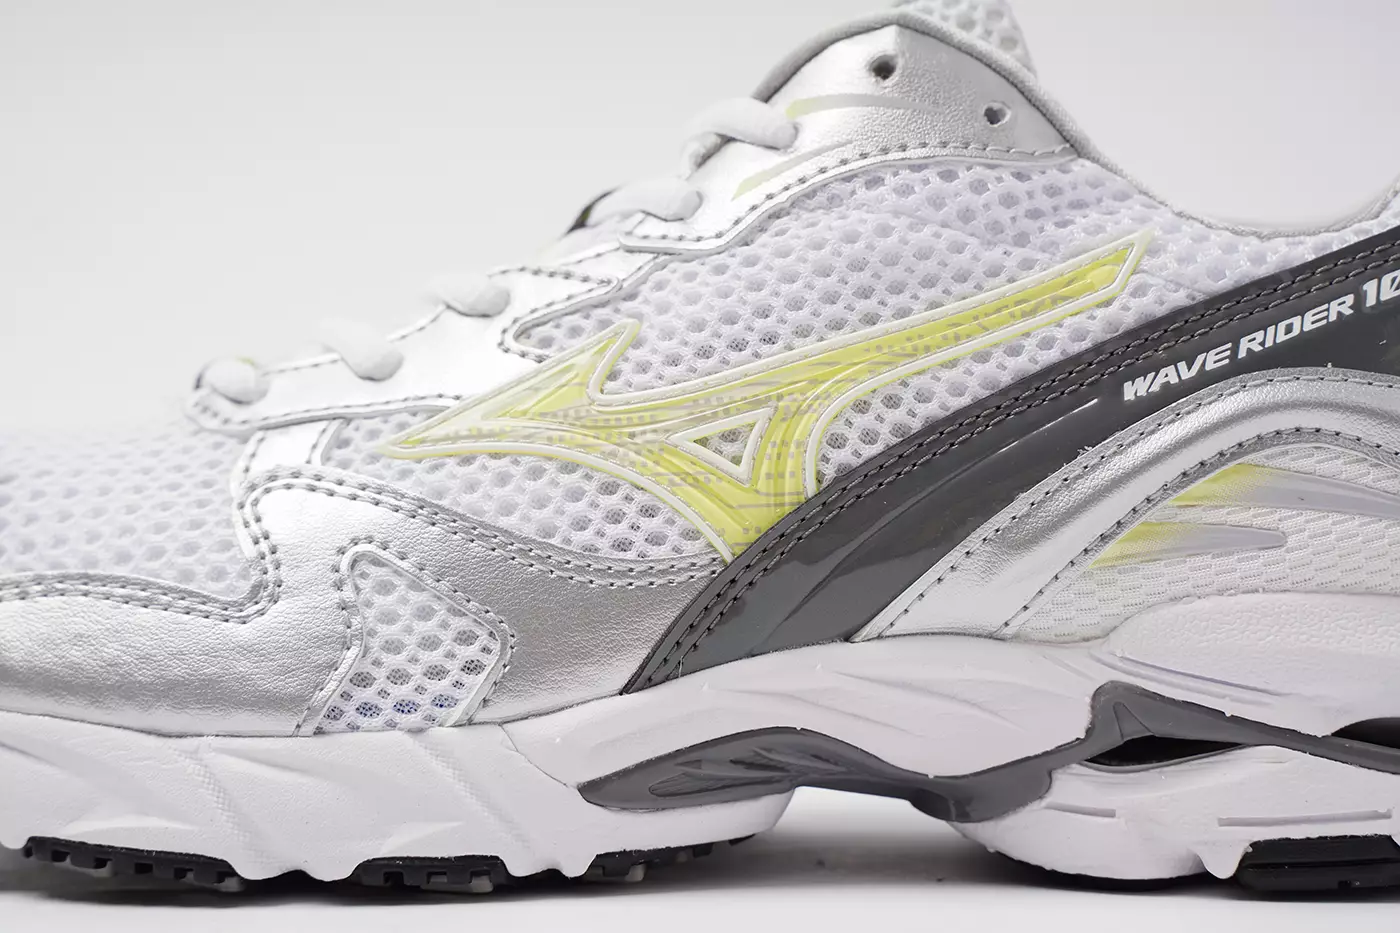 Unleashing Elegance and Performance with Mizuno's "Technical Line"